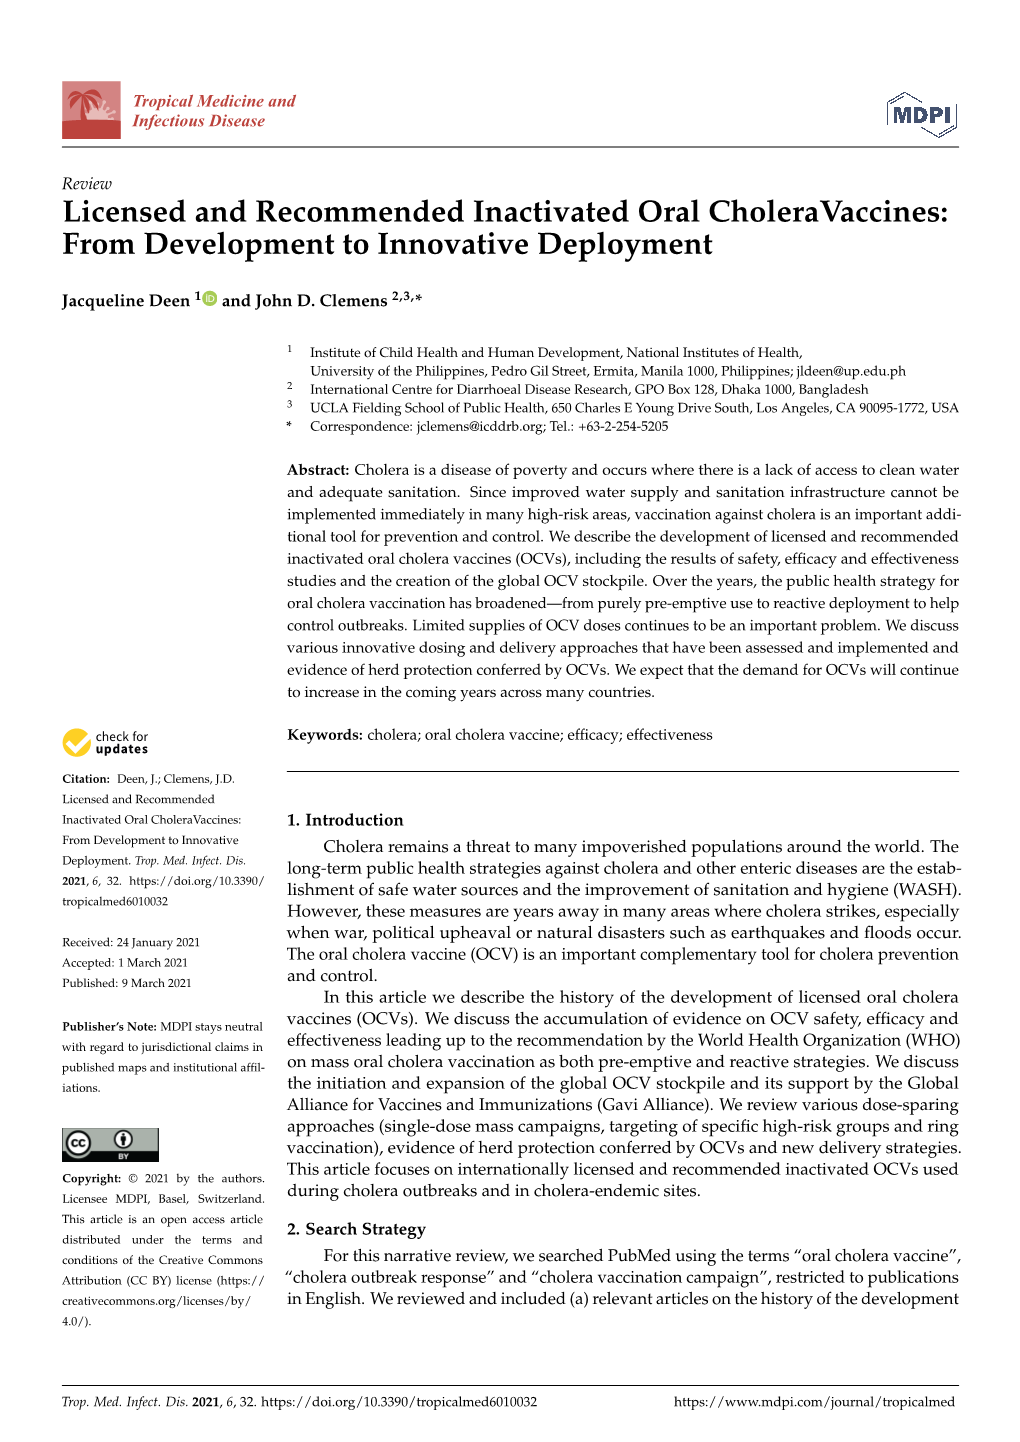 Licensed and Recommended Inactivated Oral Choleravaccines: from Development to Innovative Deployment